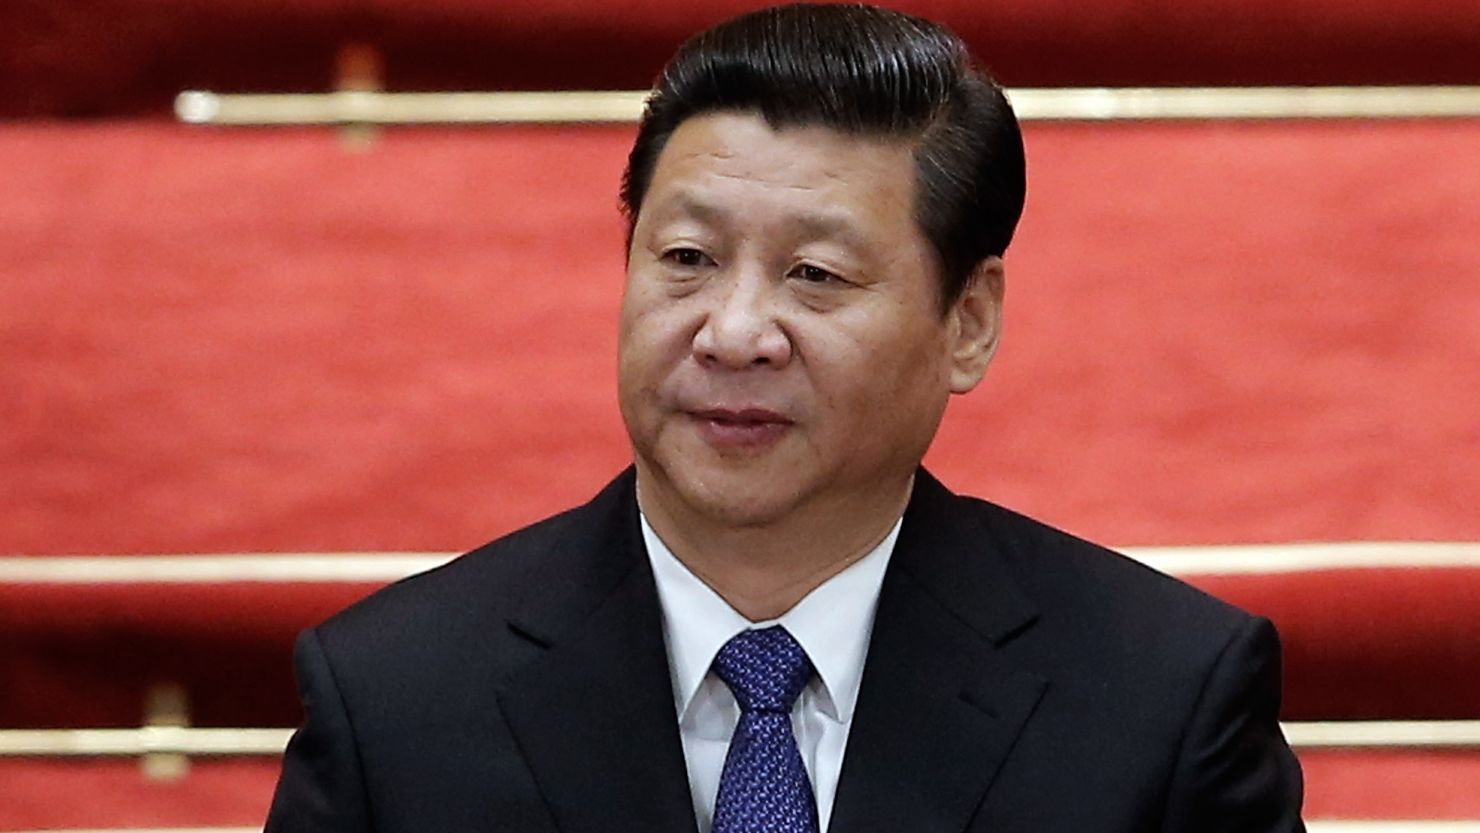 Reports of the detentions coincided with a well-publicized anti-corruption campaign led by China's new president, Xi Jinping.